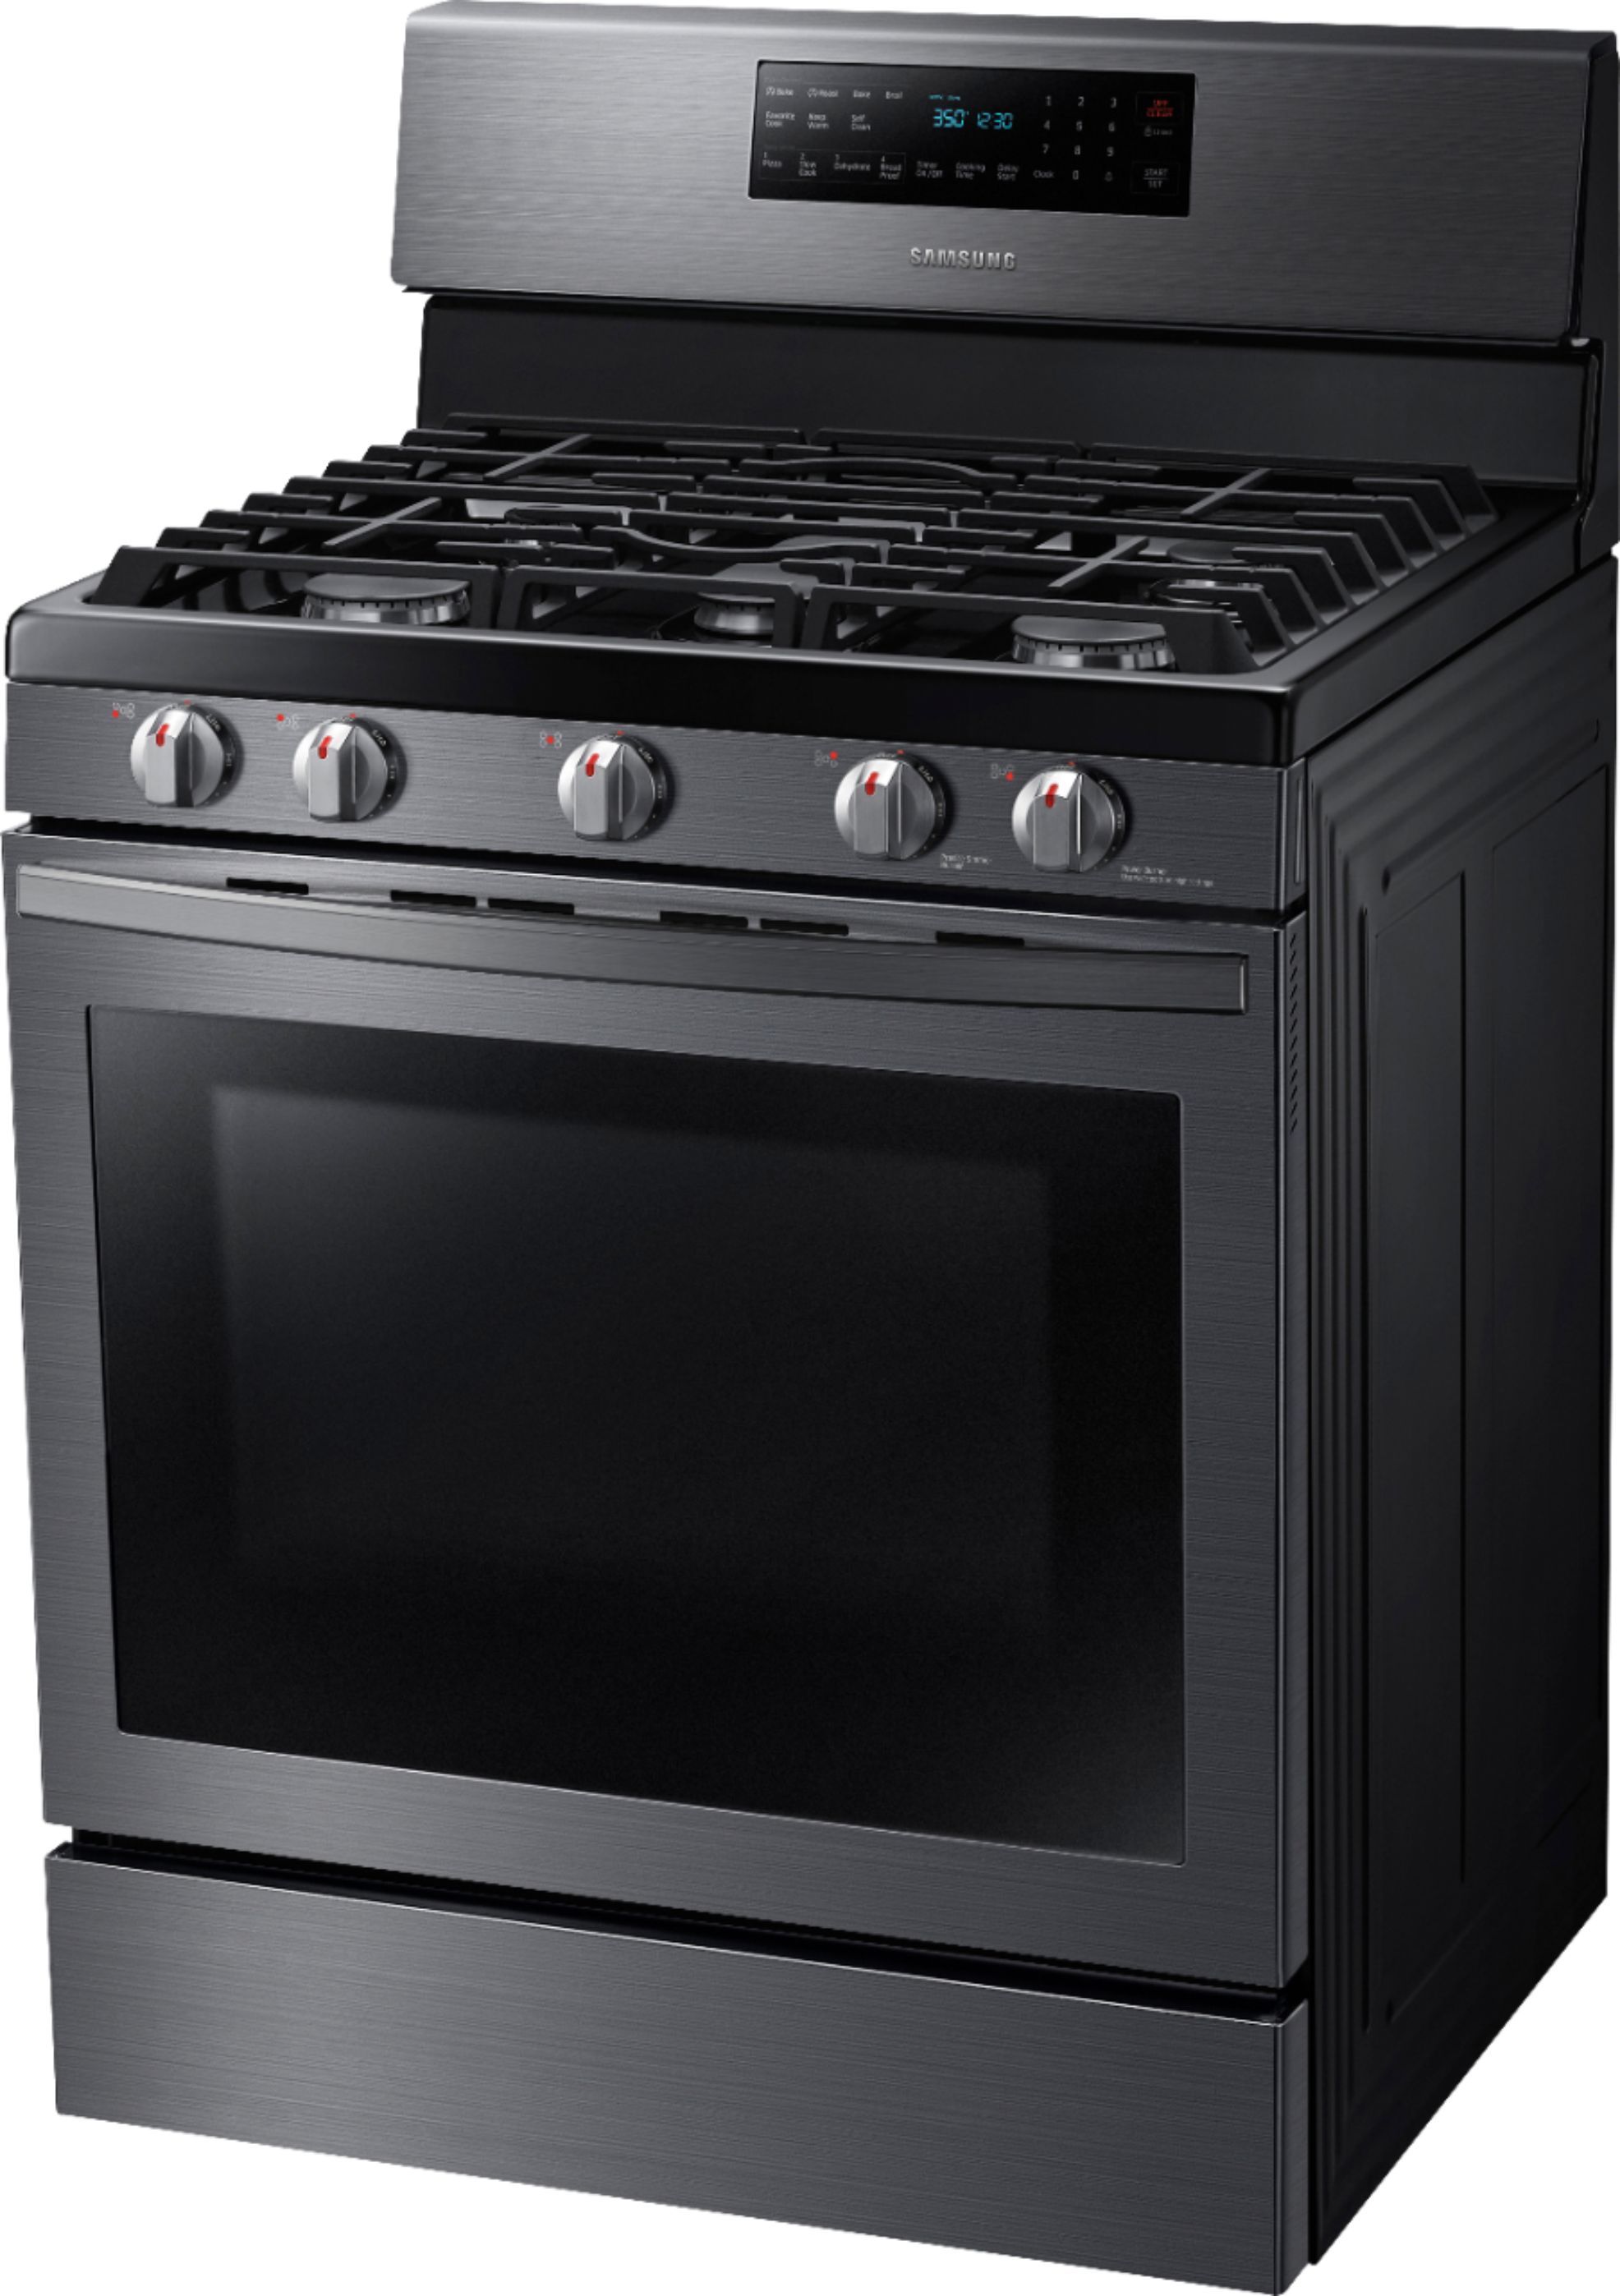 Left View: Samsung - 5.8 Cu. Ft. Freestanding Gas Convection Range with Air Fry, Fingerprint Resistant - Black stainless steel